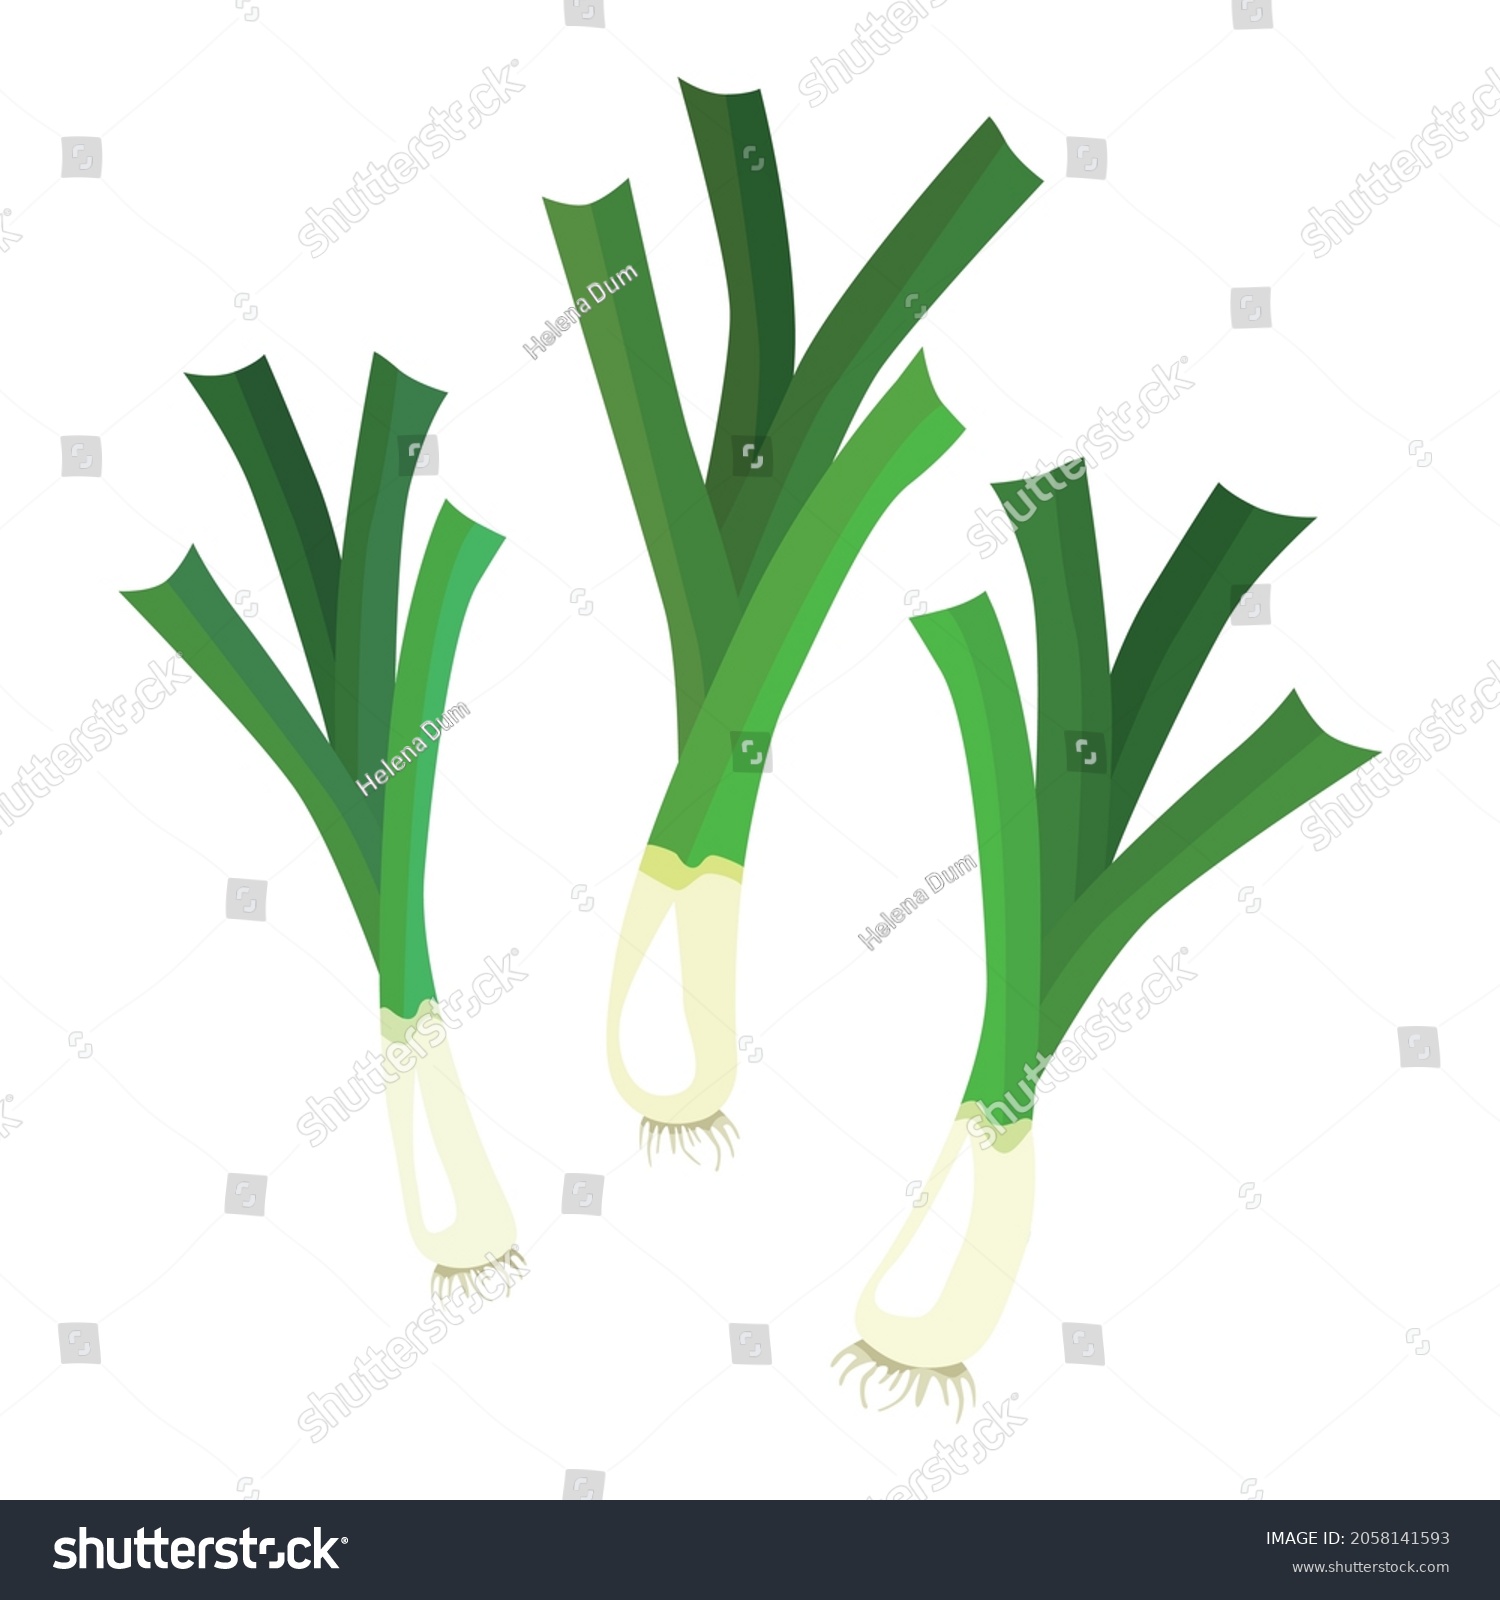 Set leek or pearl is a herbaceous plant of the Onion subfamily. A tasty and healthy plant used for food. Vector illustration isolated on a white background for design and web. #2058141593